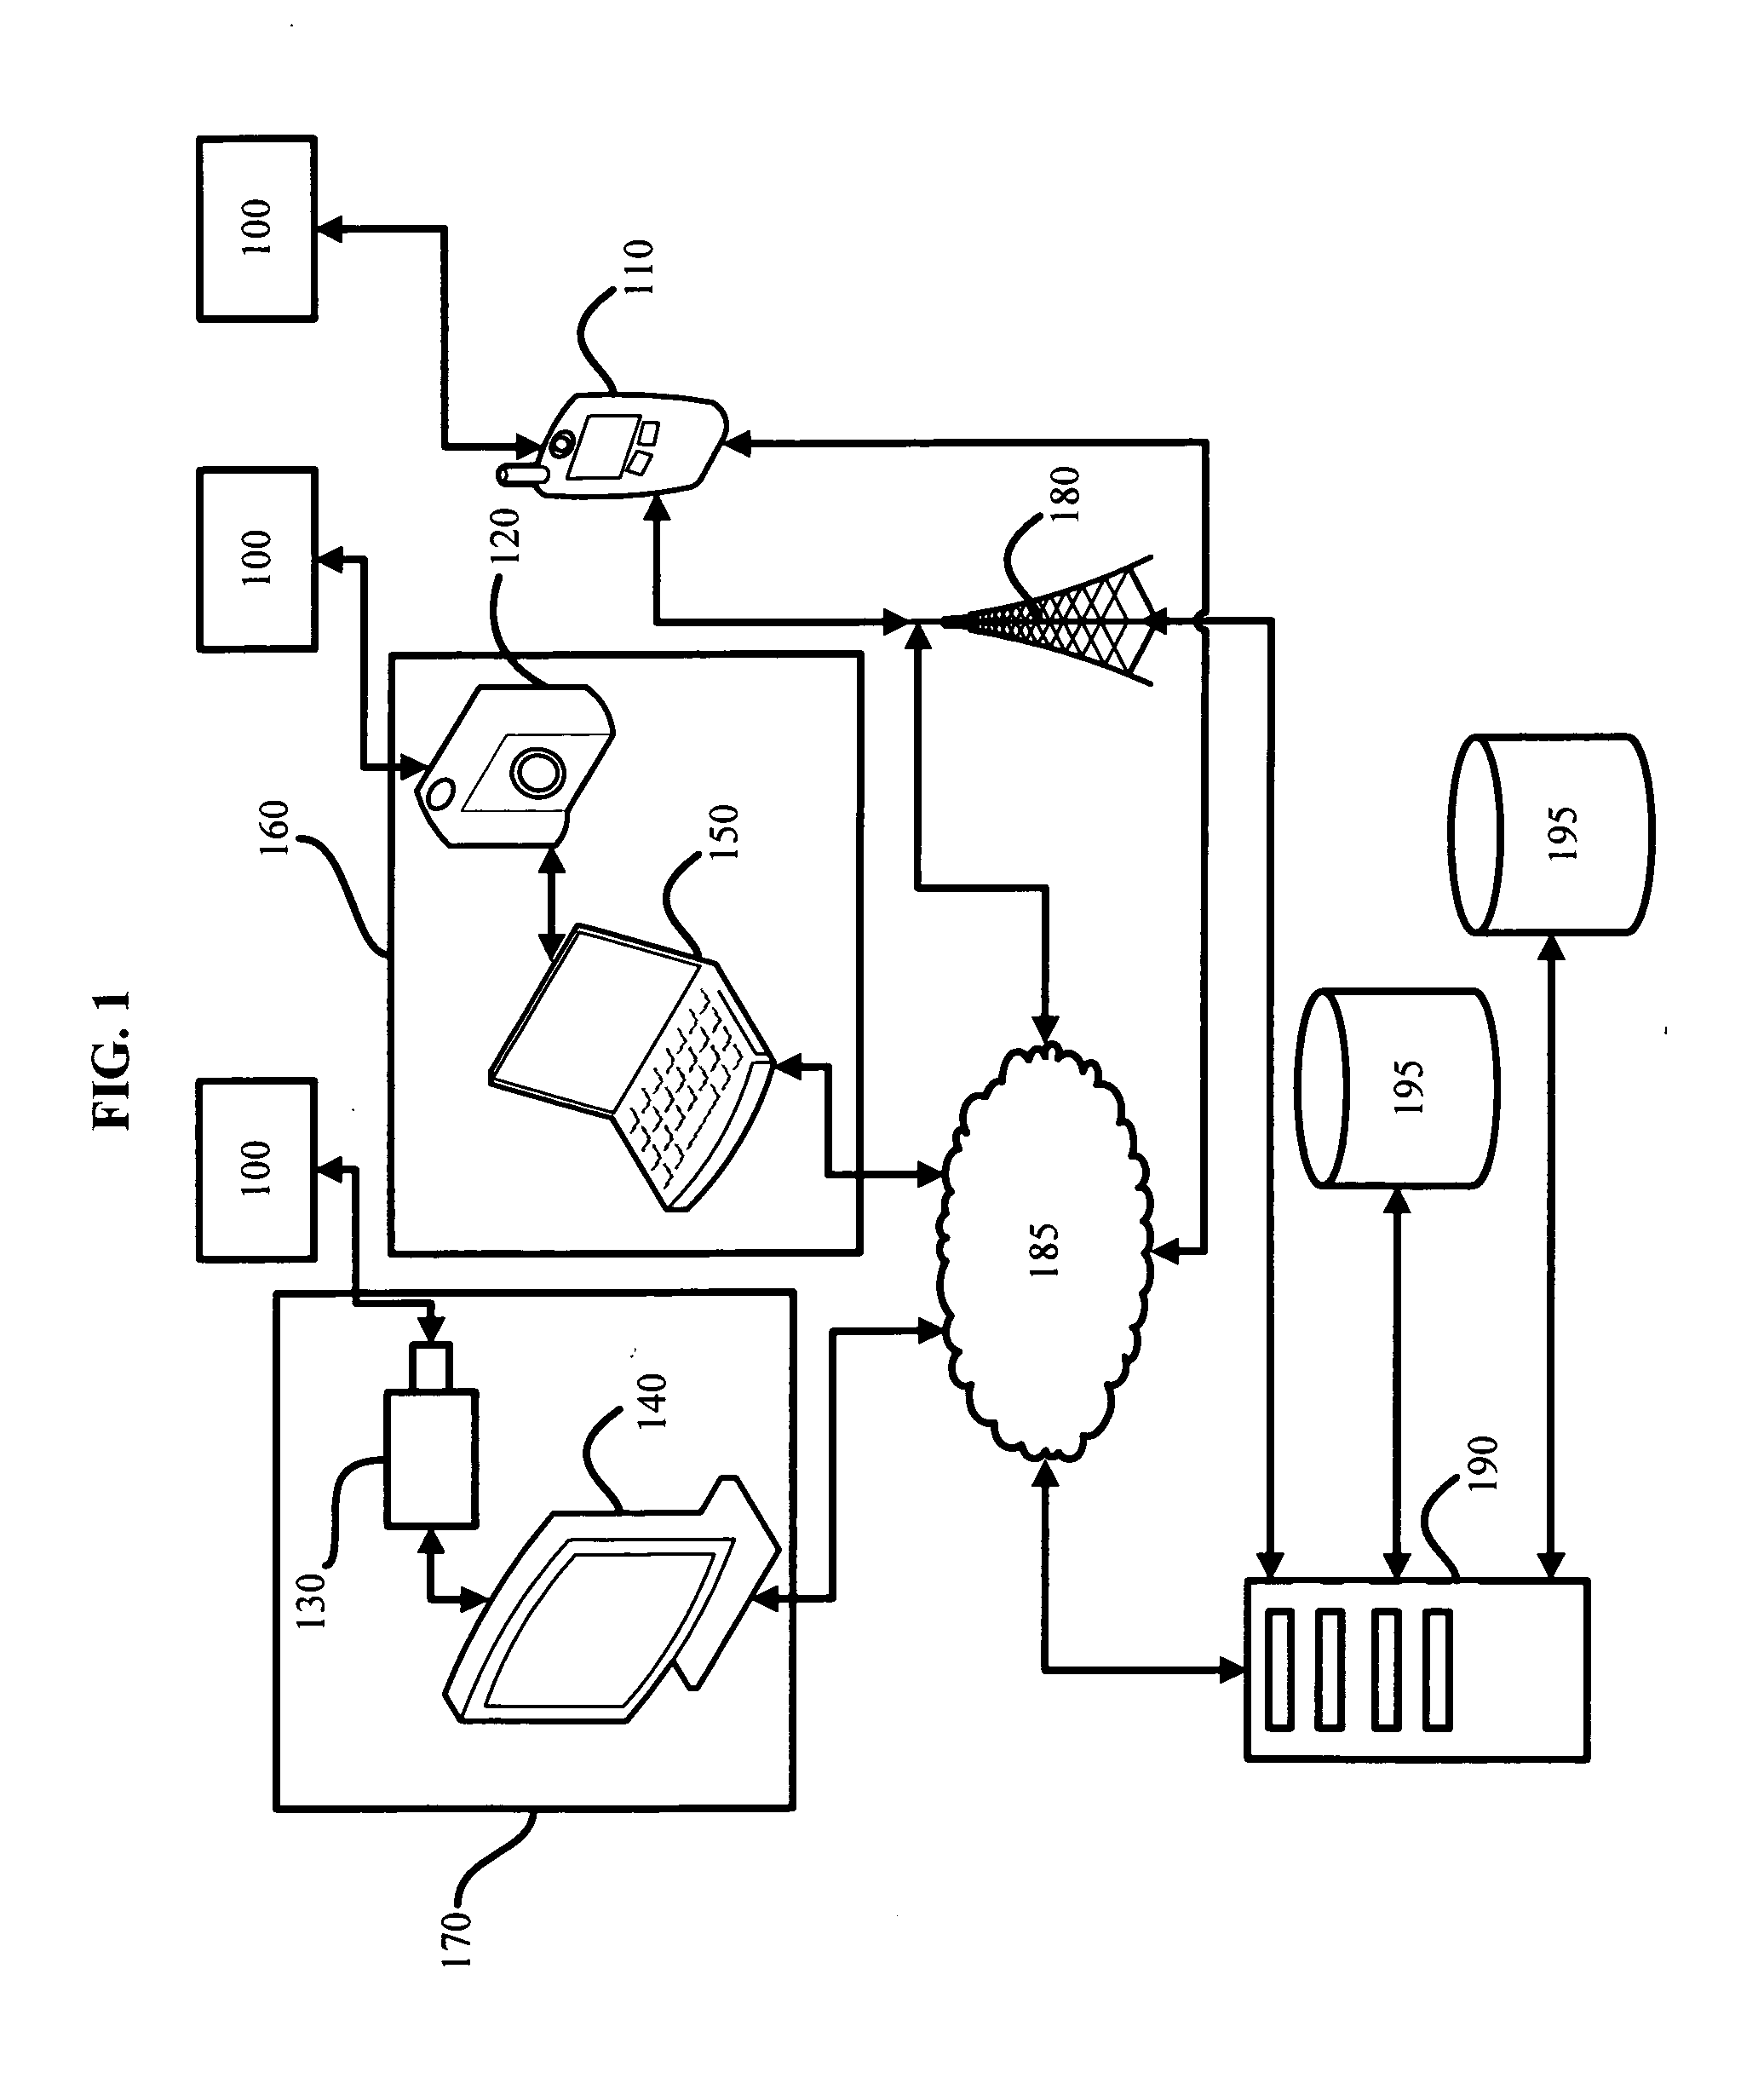 Computing systems and methods for electronically indicating the acceptability of a product